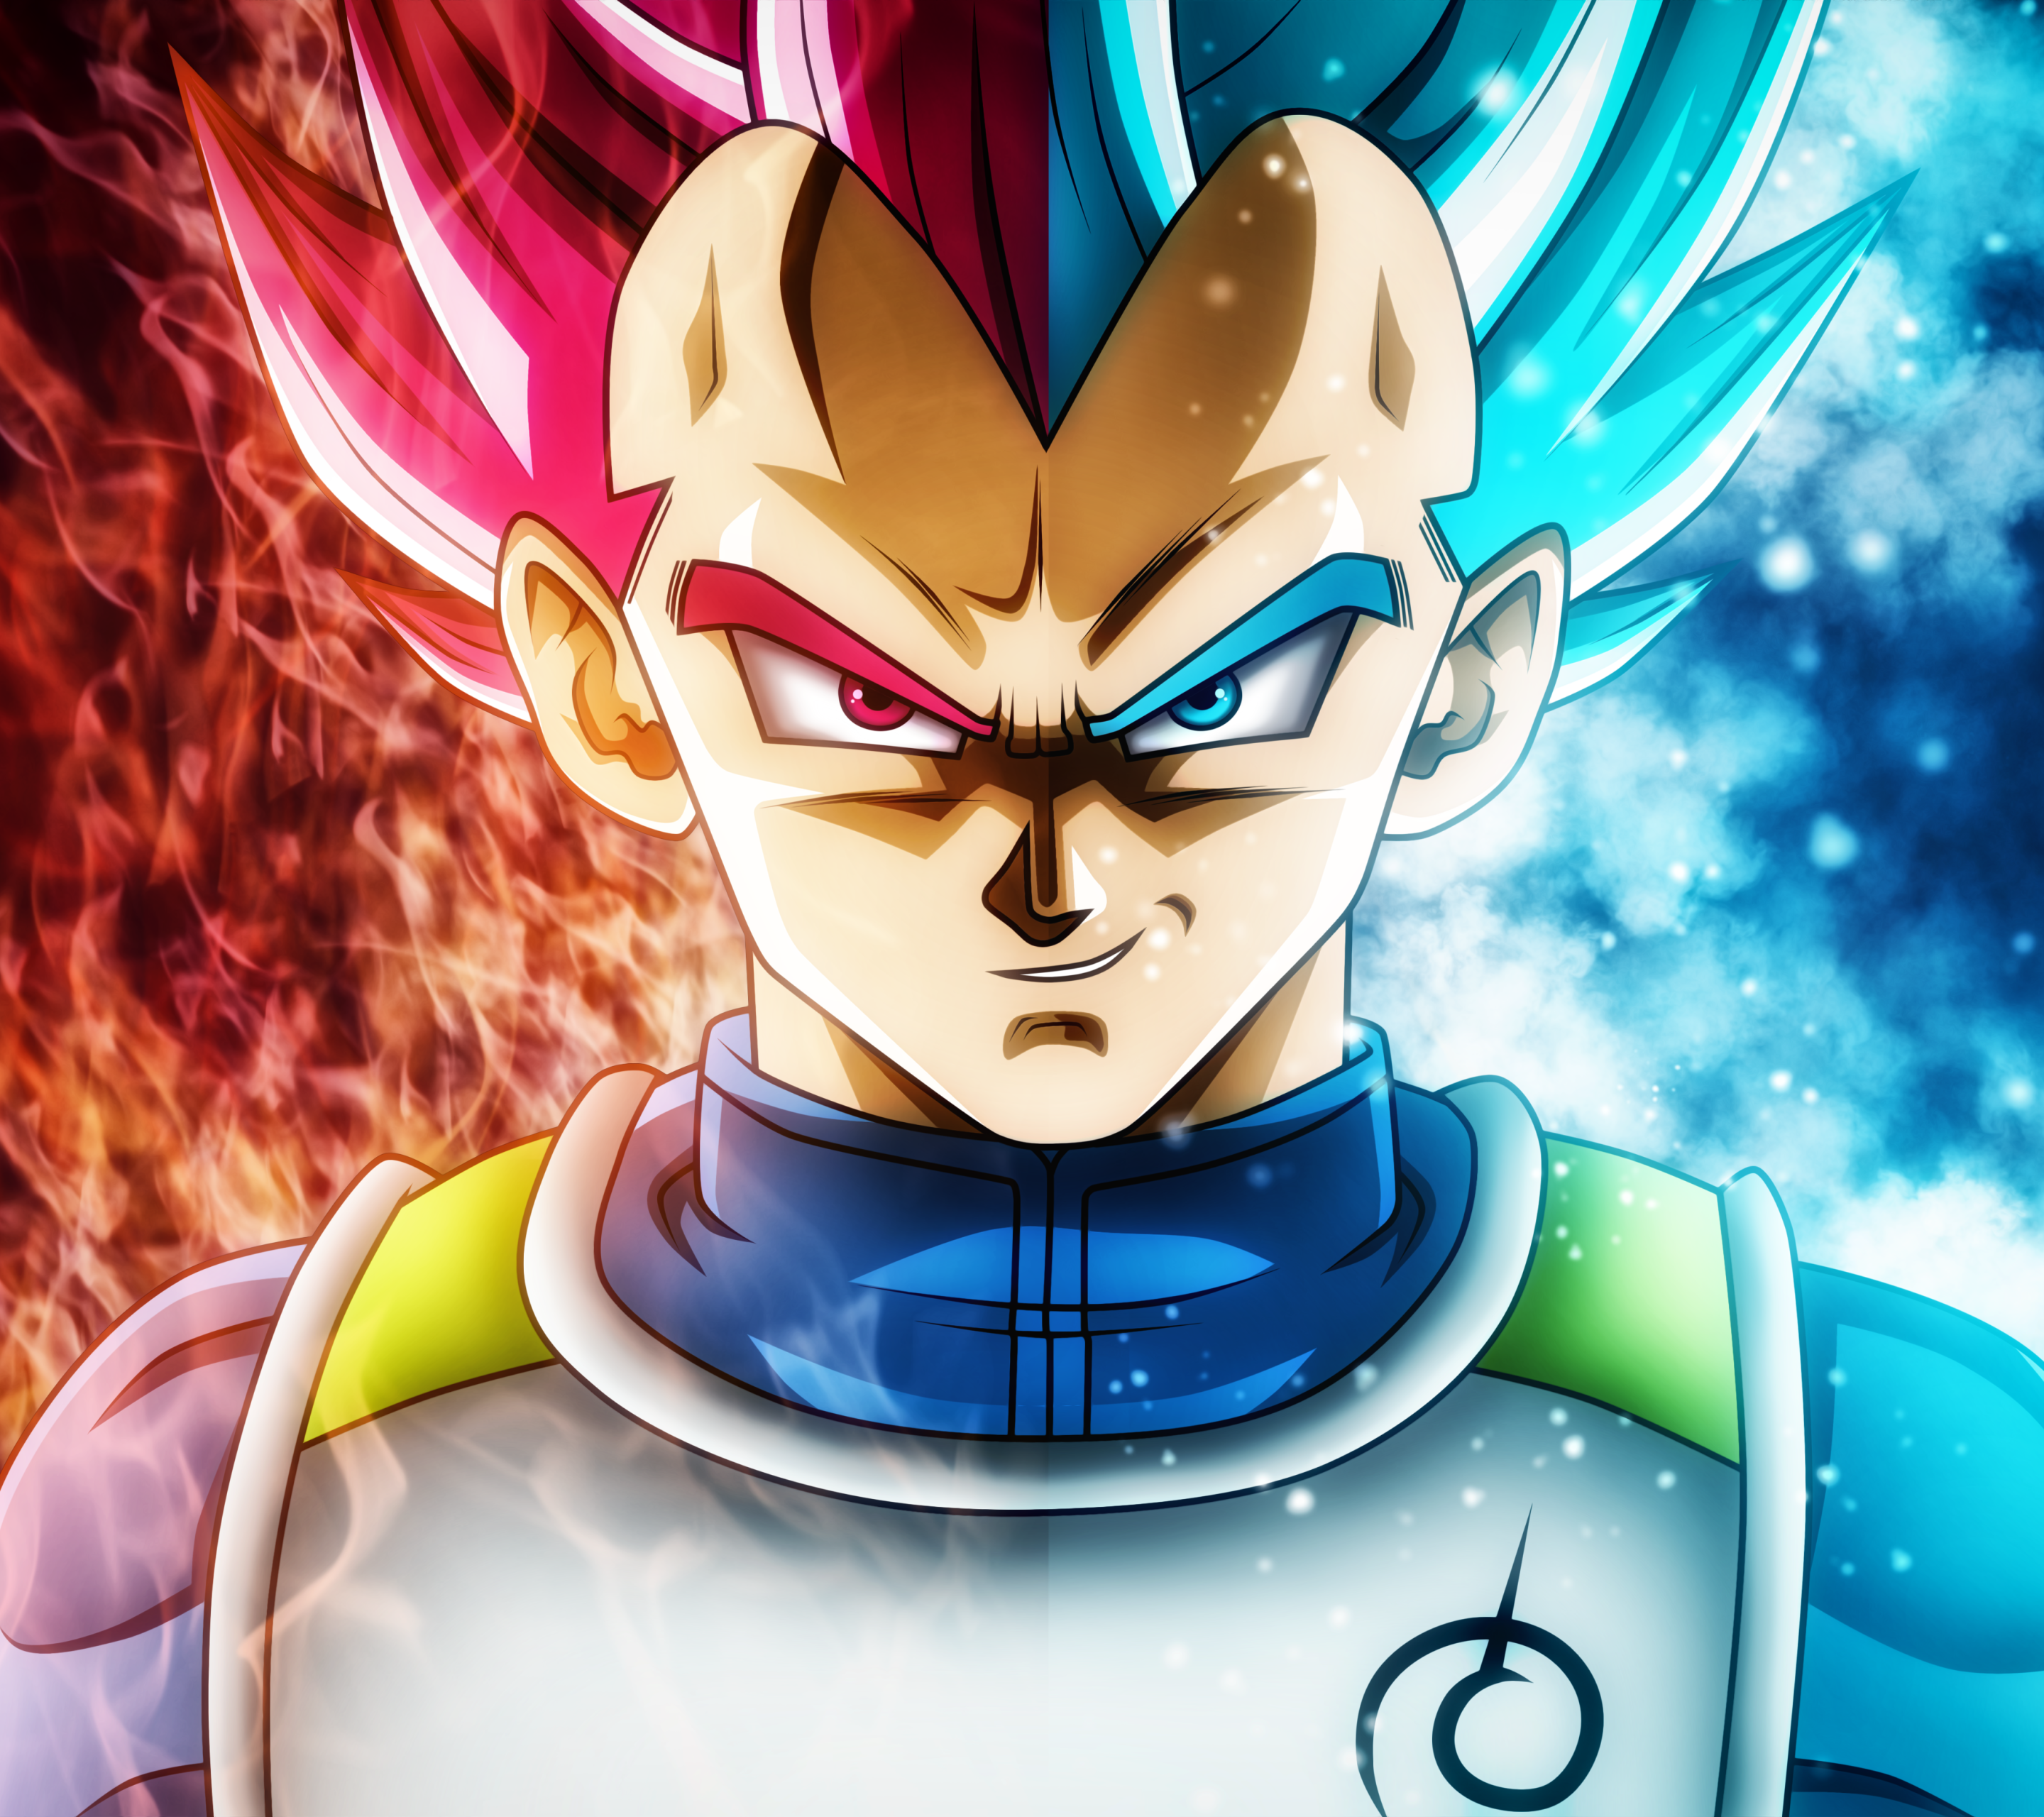 Download This Wallpaper Anime Dragon Ball Super (2880x2560) For All Your Phones And Tablets. Anime, Anime Dragon Ball, Anime Dragon Ball Super